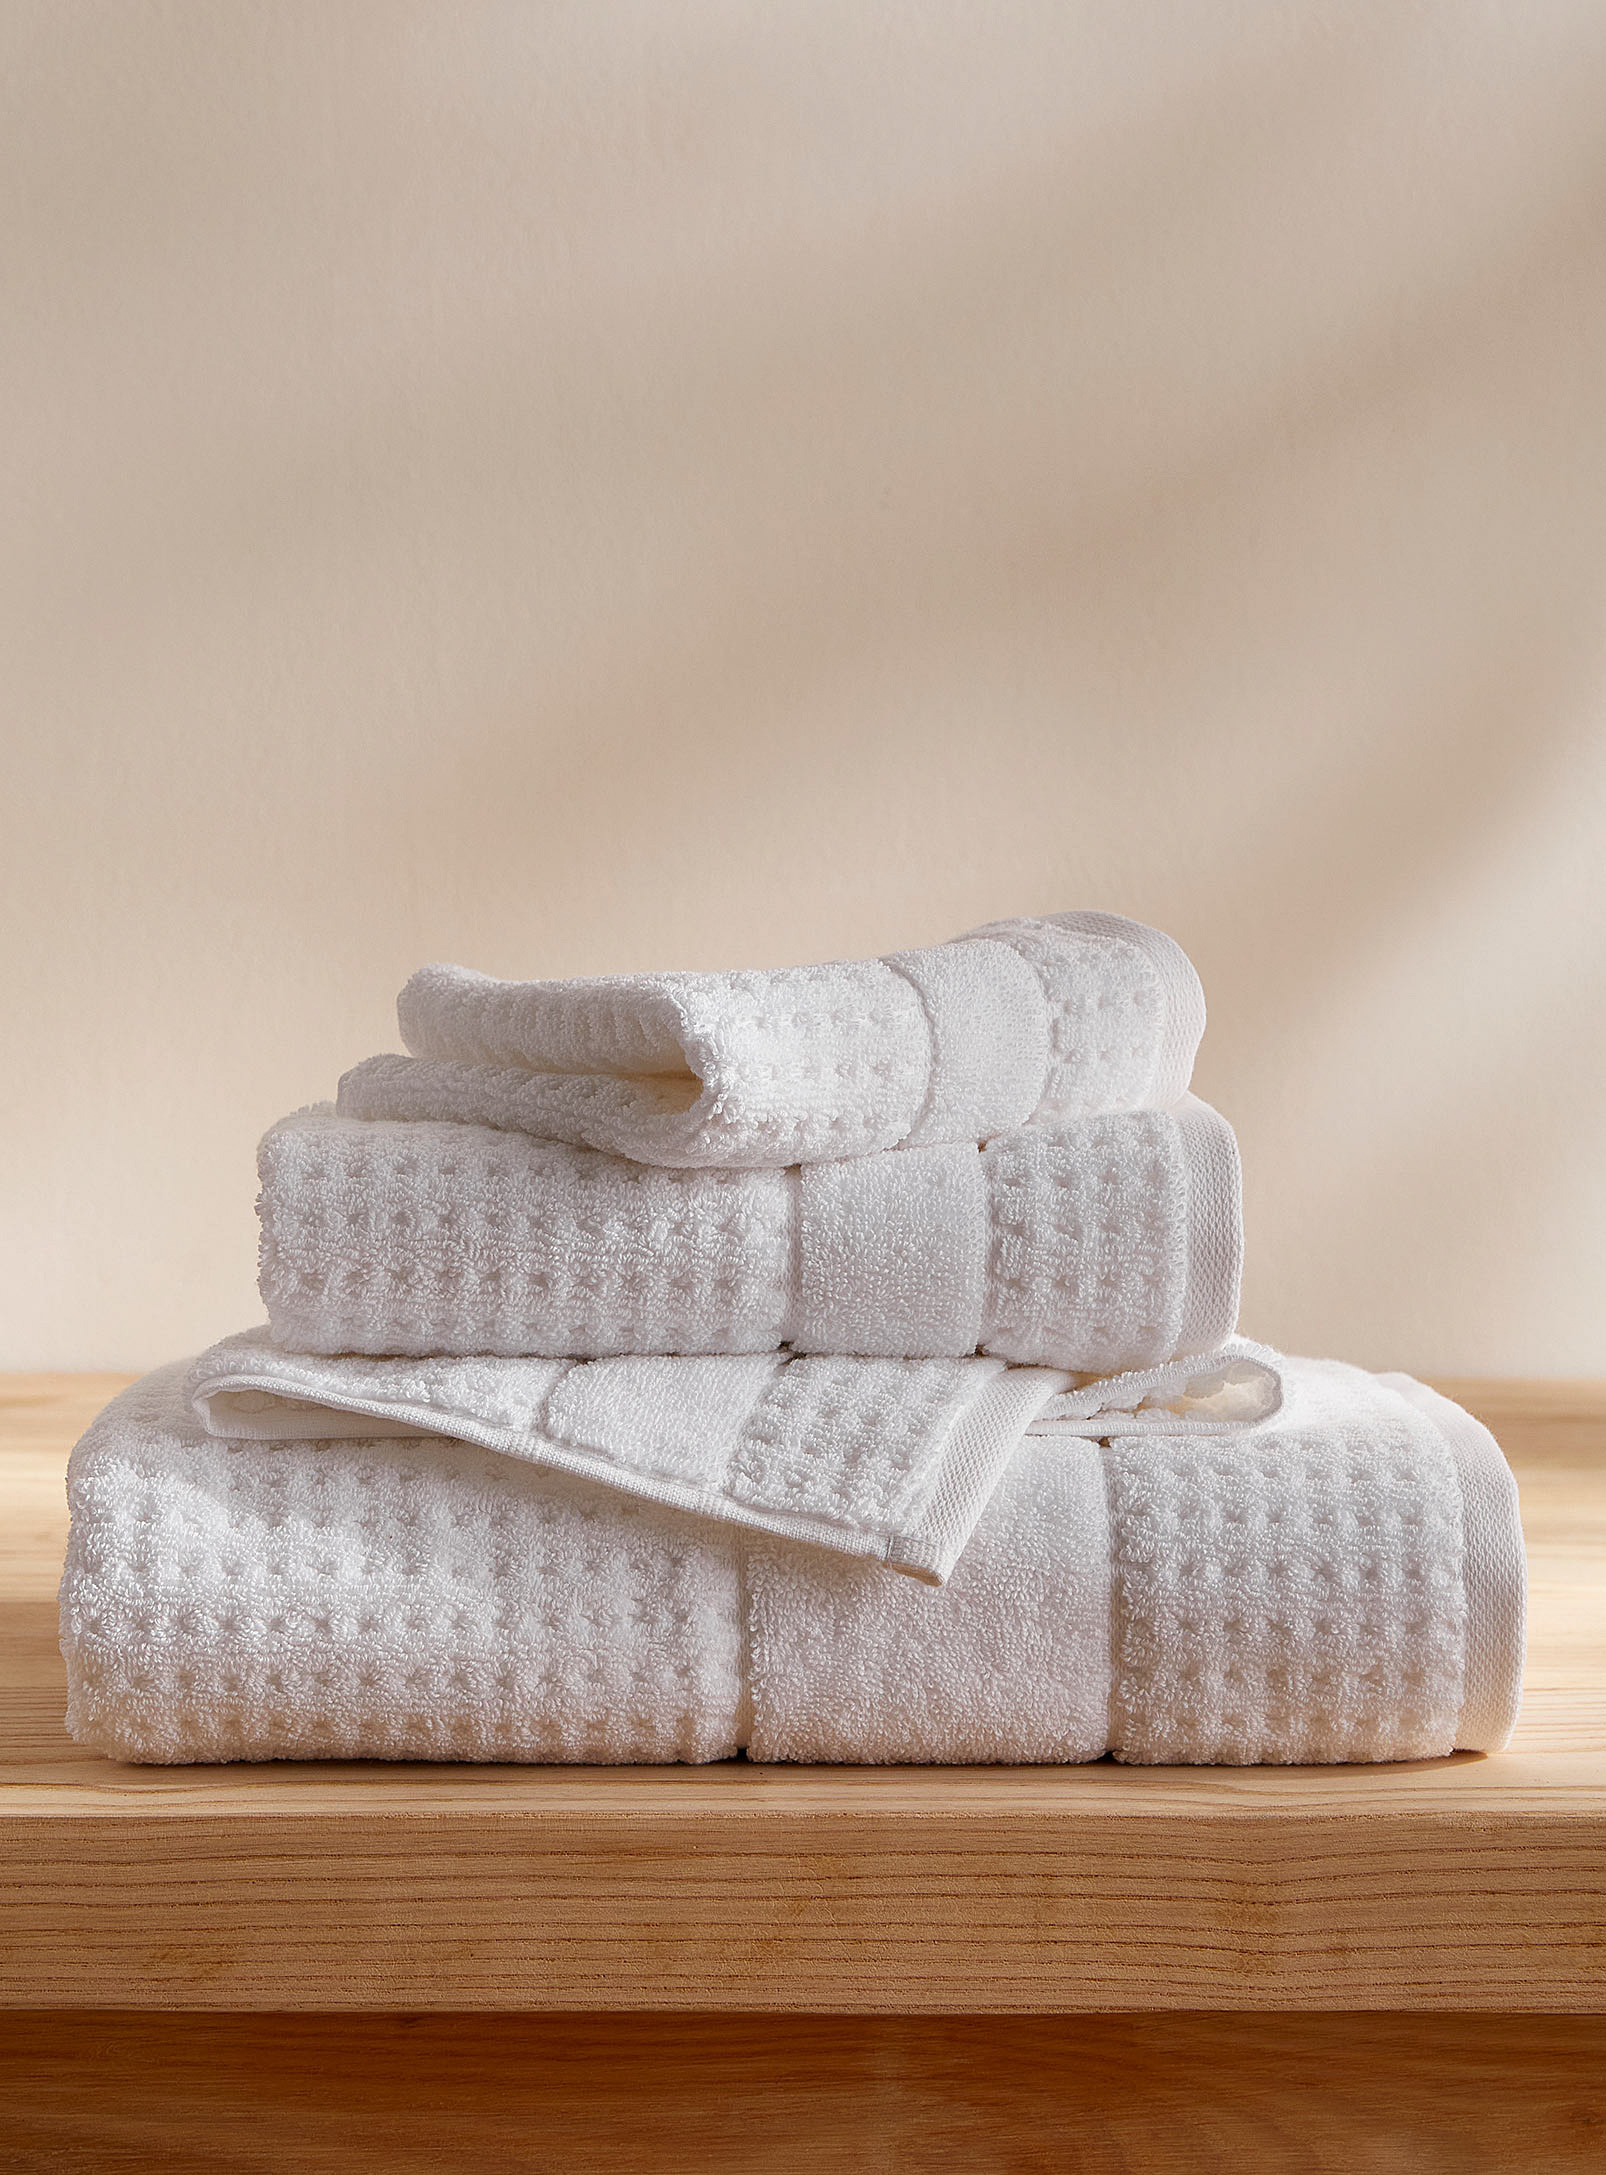 Simons Maison Ultra-soft Brushed Turkish Cotton Towels Durable And Enveloping, Waffled Texture In White